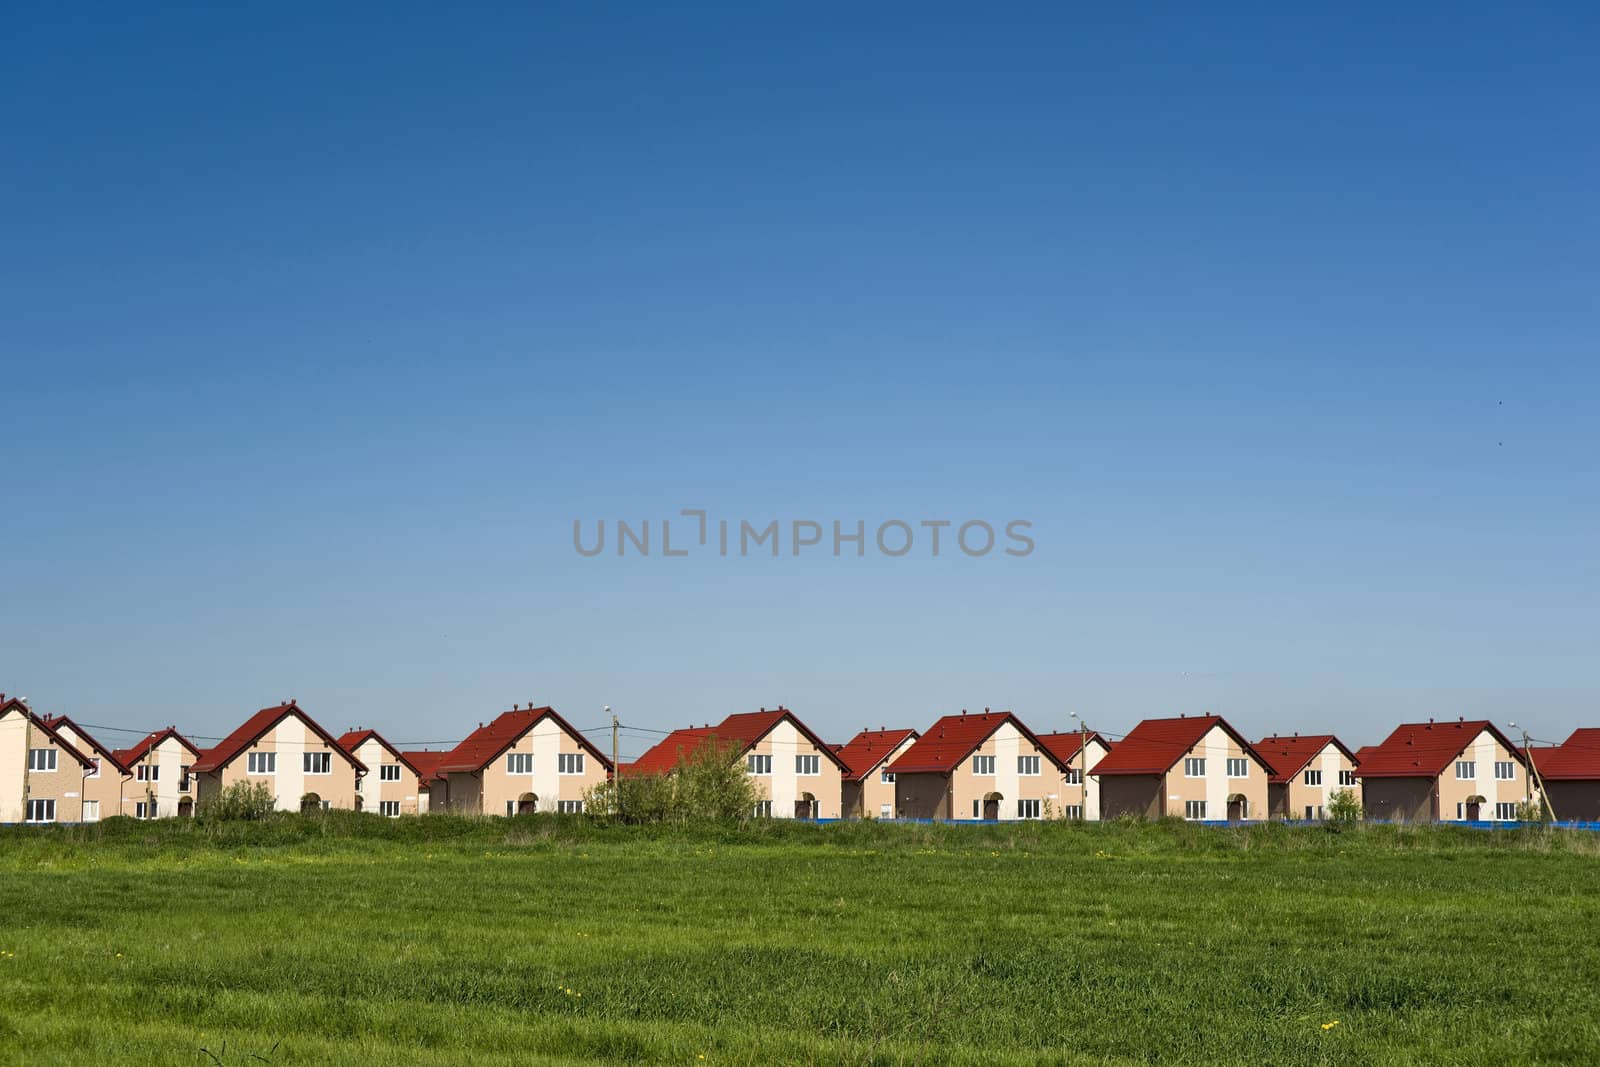 New cottages and blue sky by mulden